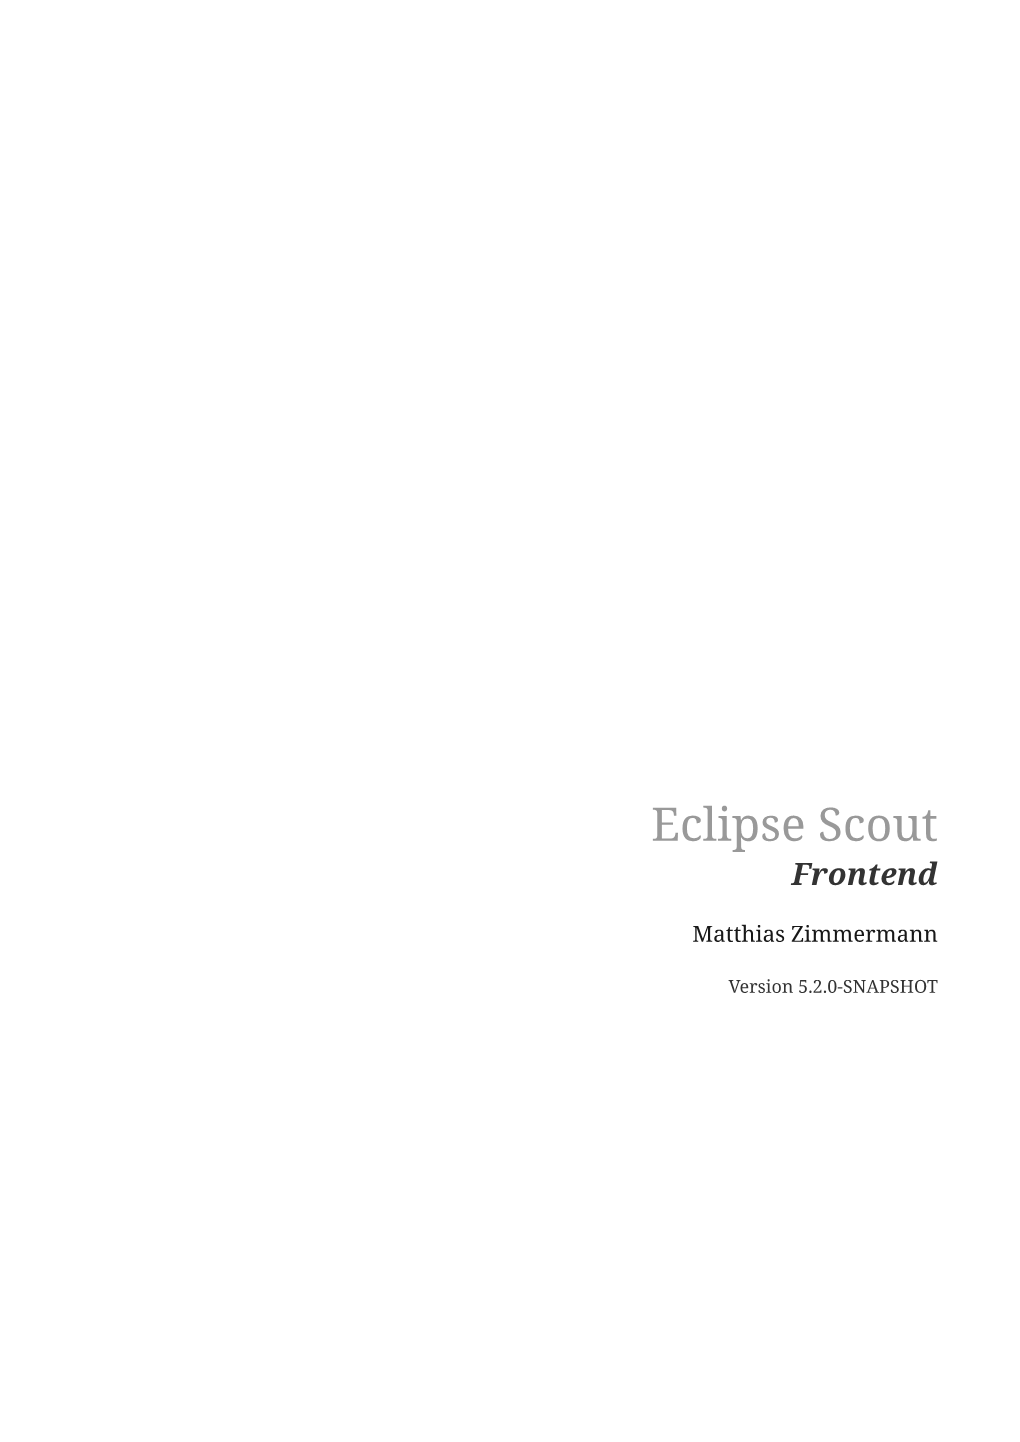 Eclipse Scout: Frontend